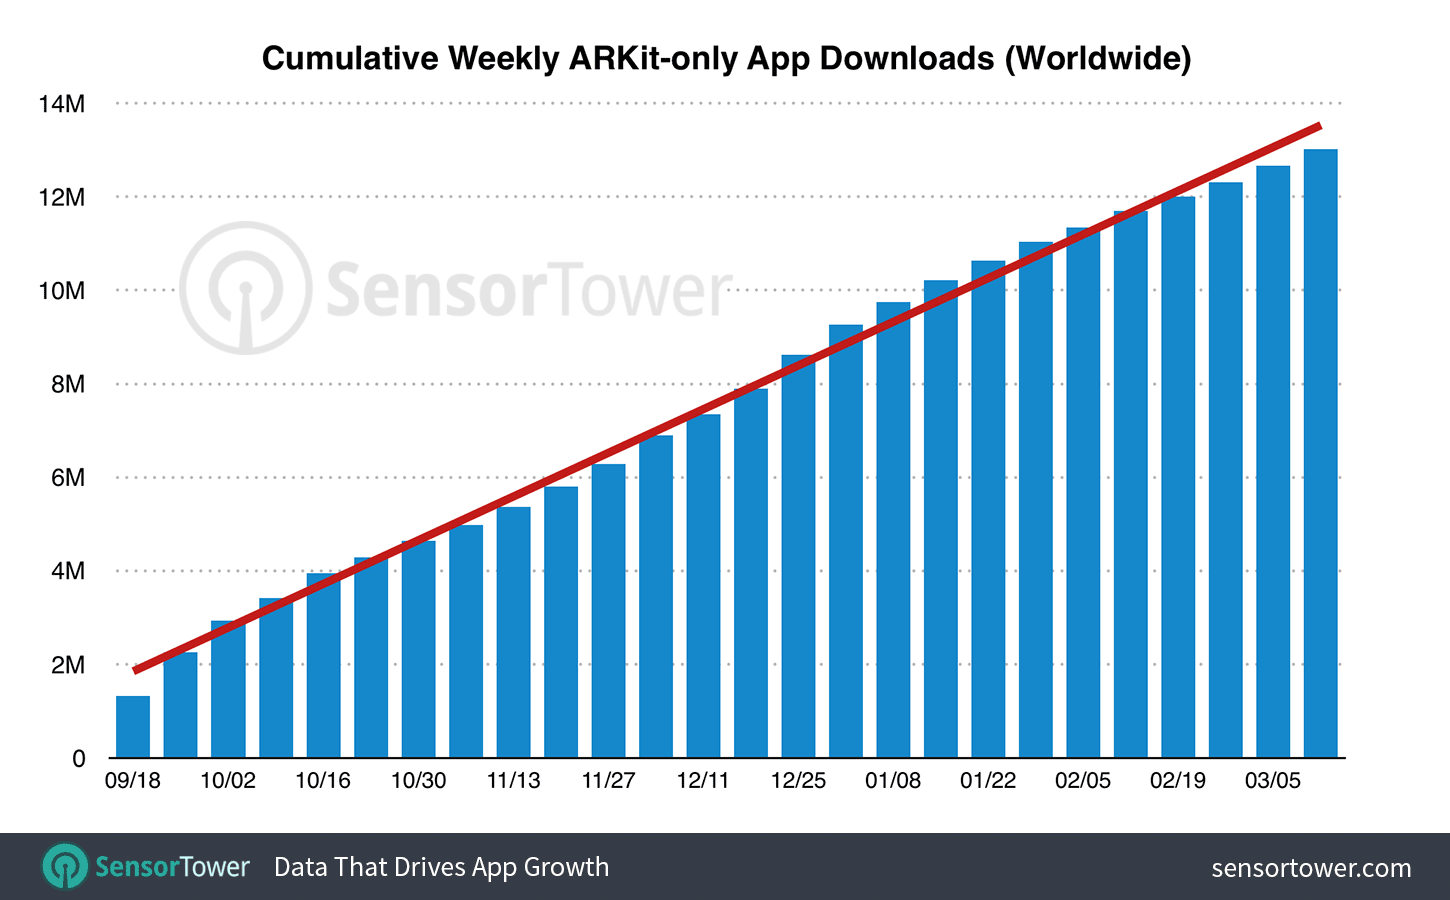 Chart showing downloads of ARKit-only apps worldwide since September 2017